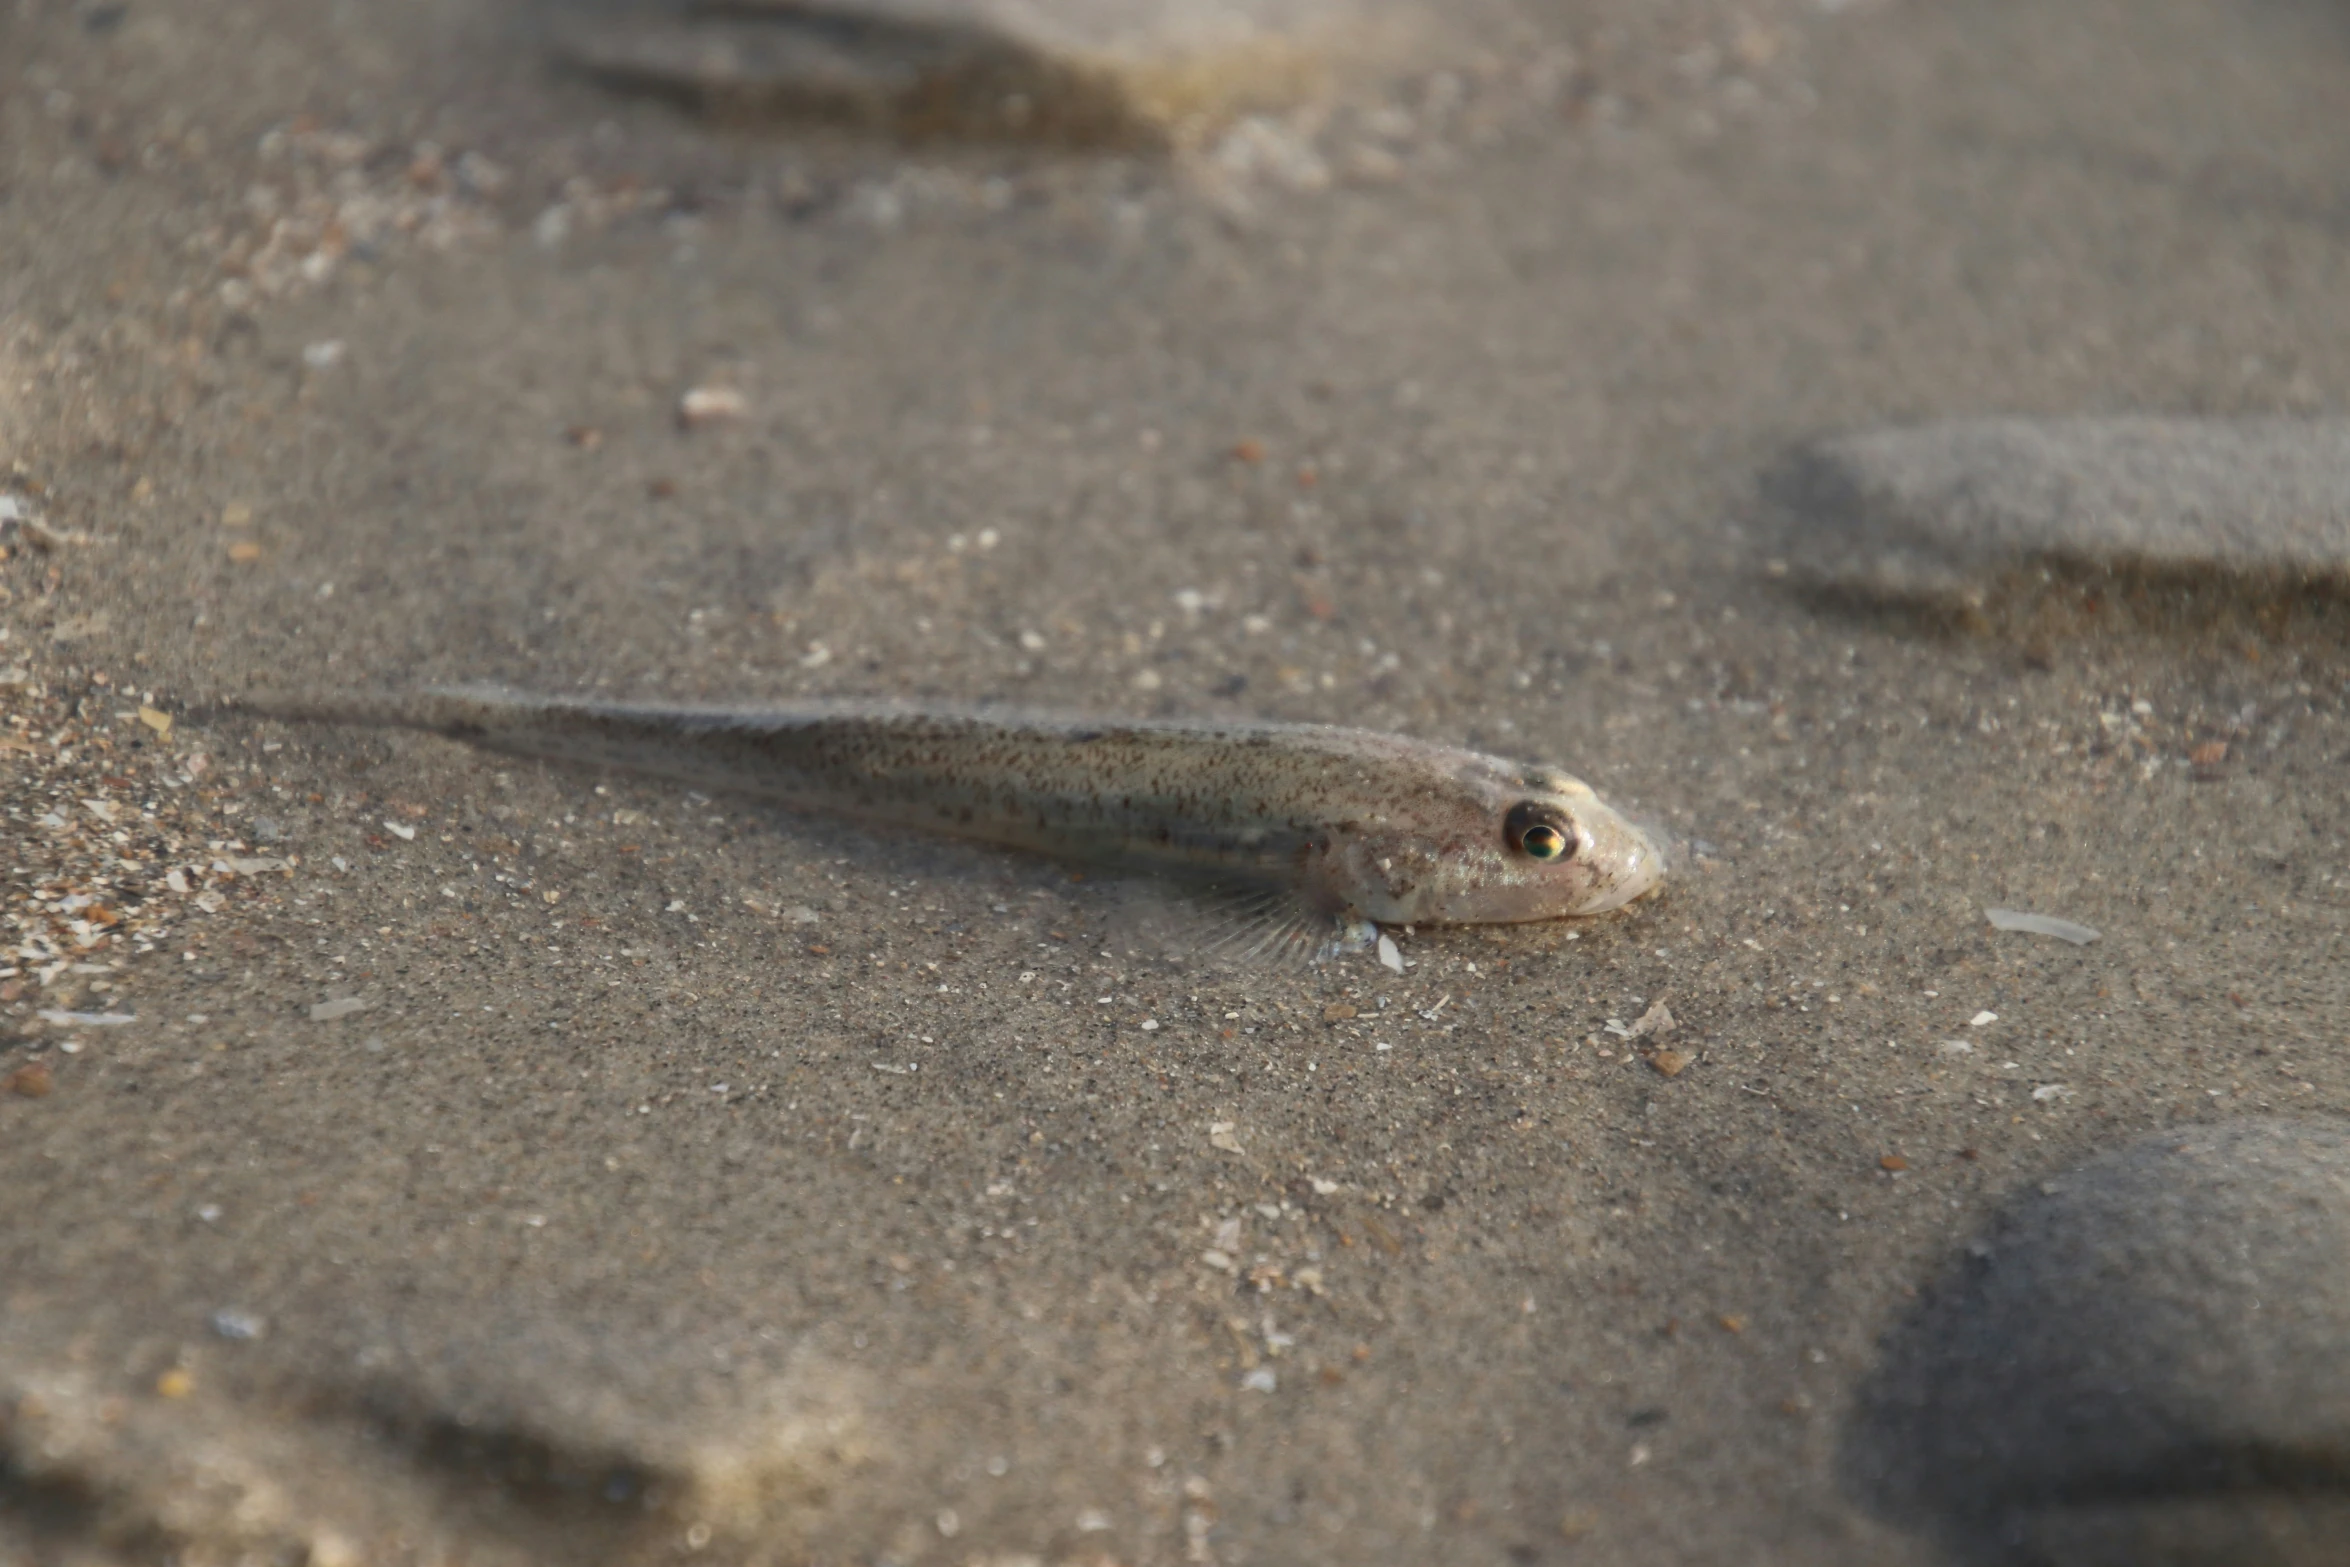 a small fish on the sand with small rocks nearby